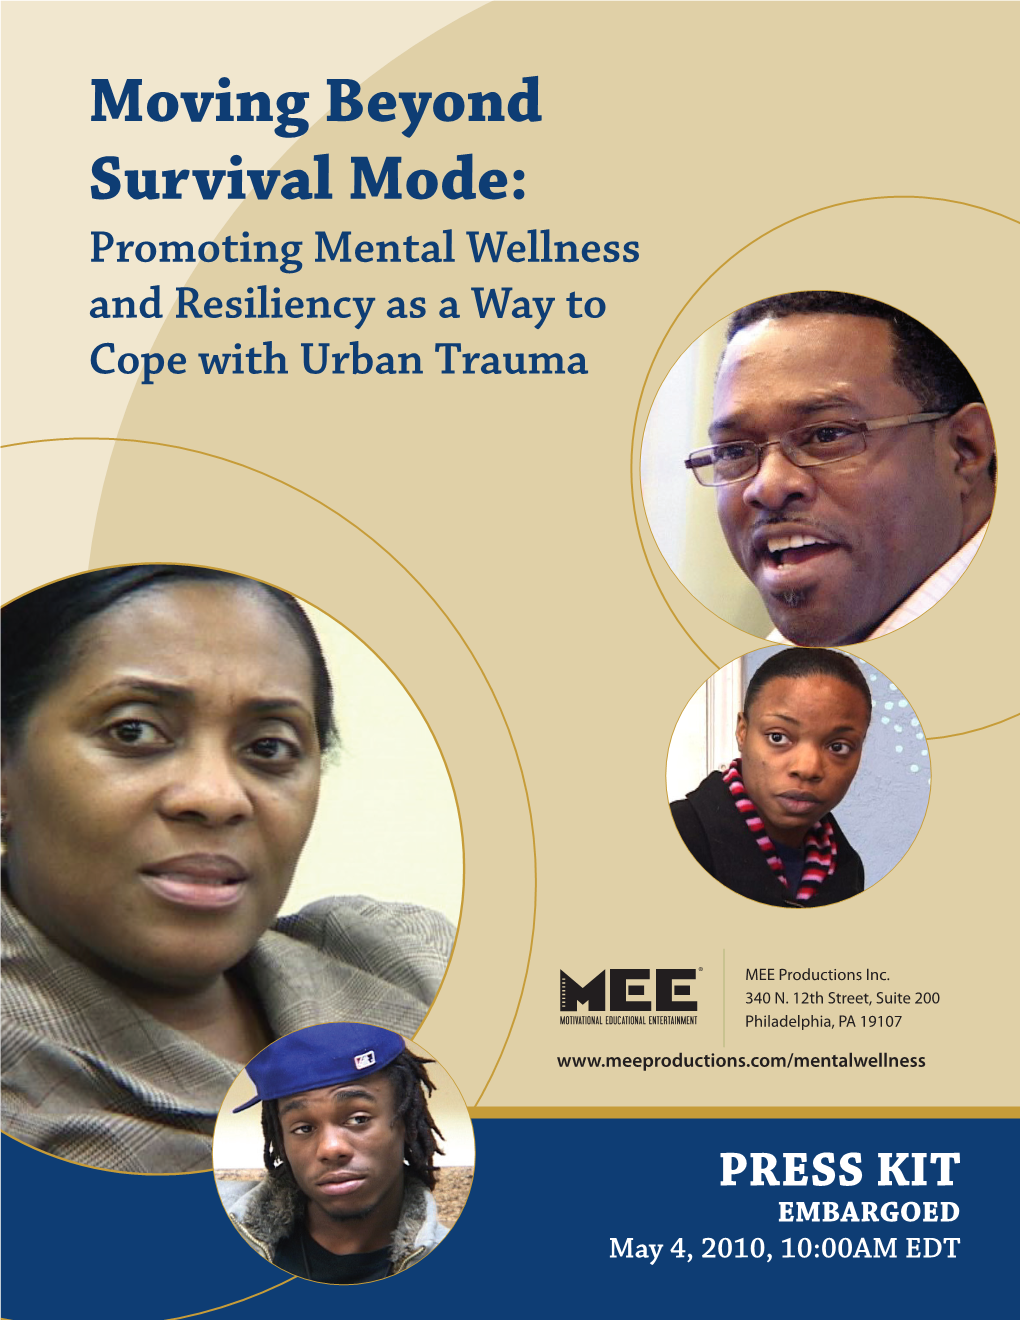 Moving Beyond Survival Mode: Promoting Mental Wellness and Resiliency As a Way to Cope with Urban Trauma